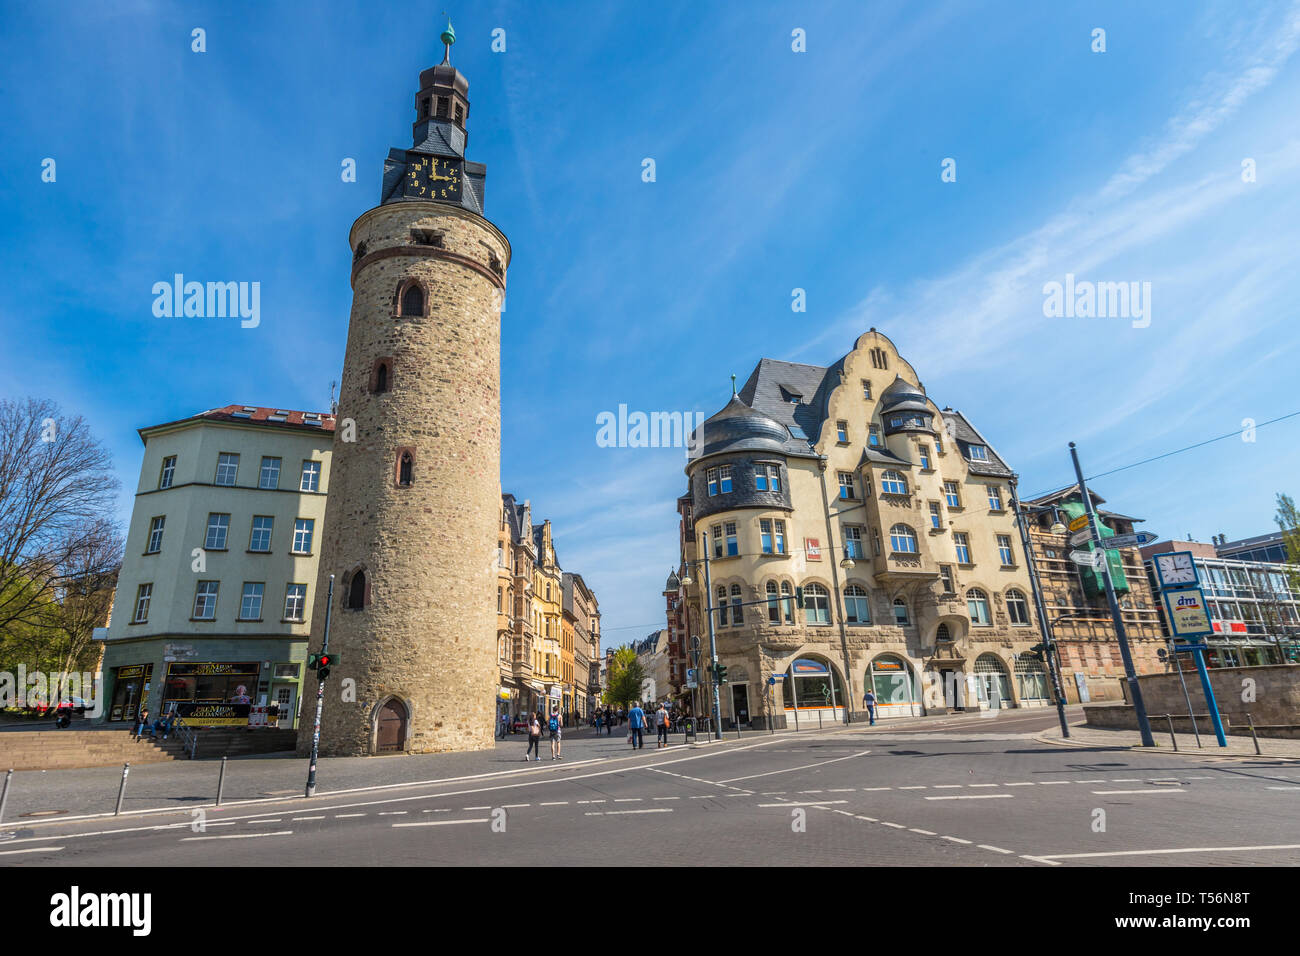 Old towers of Halle Saale in East Germany Stock Photo